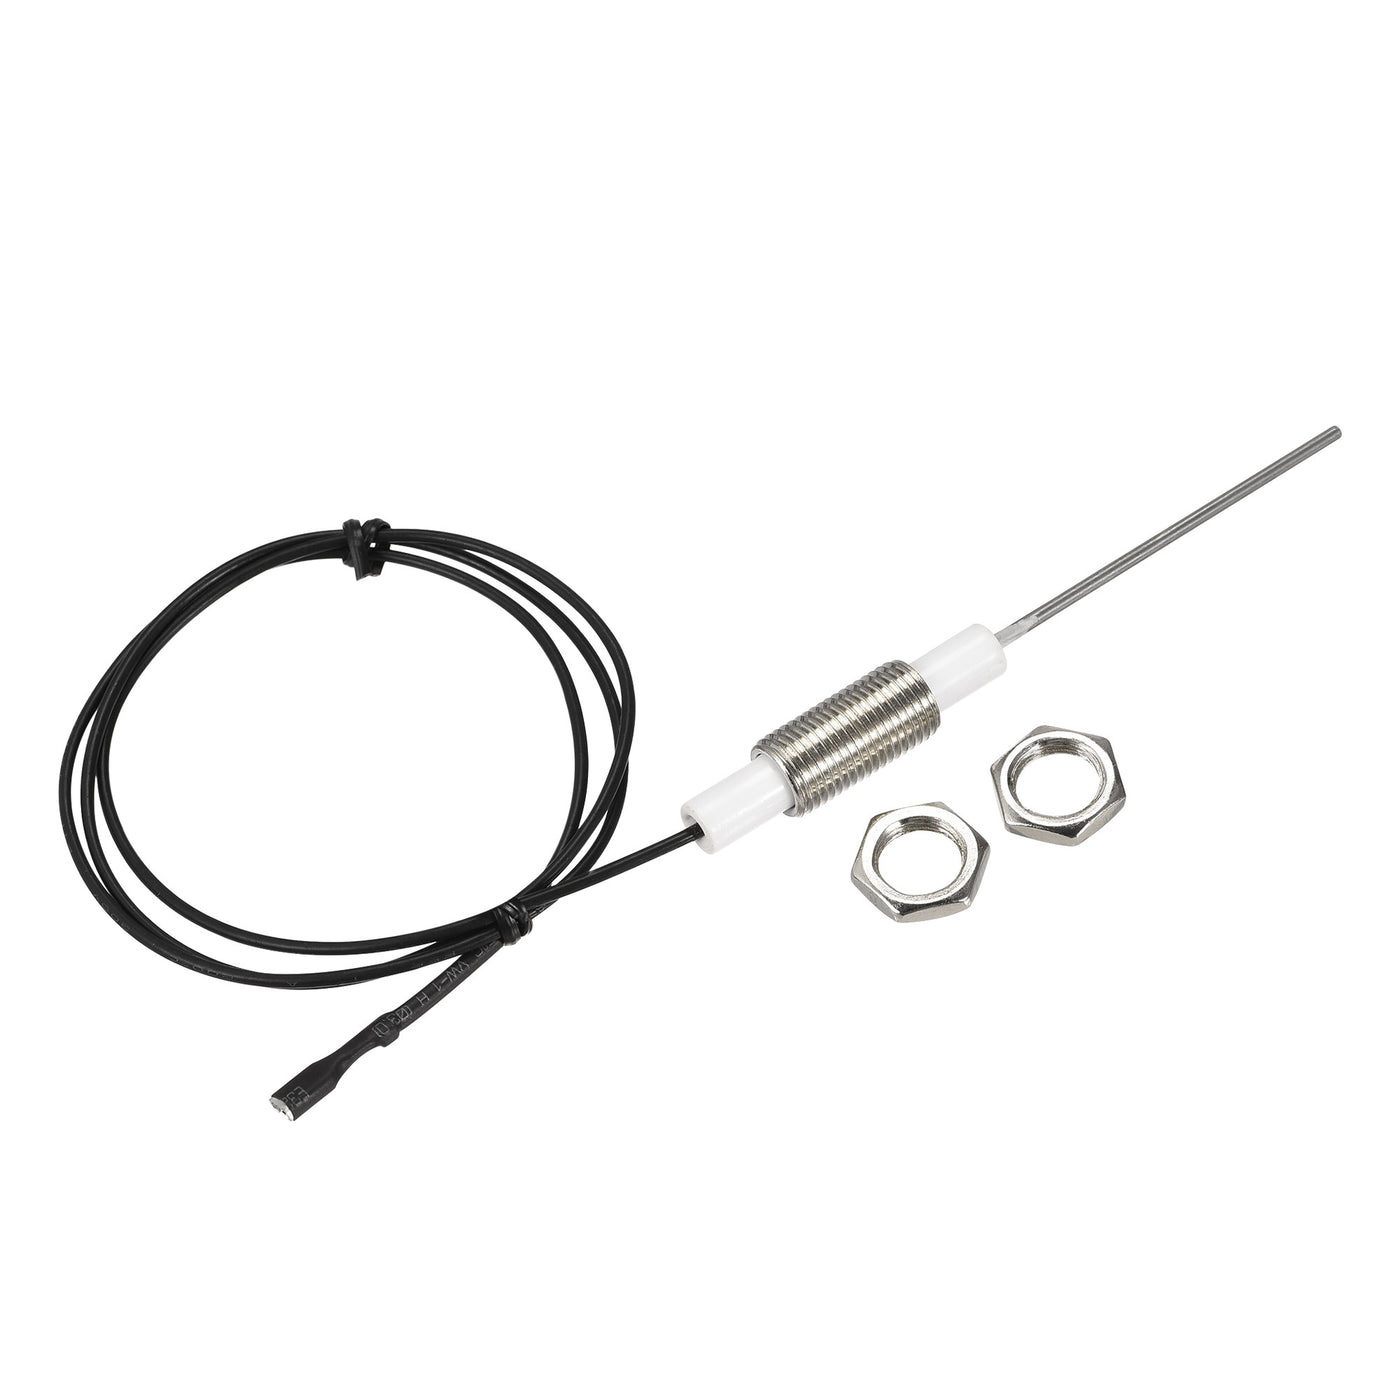 uxcell Uxcell Ignitor Wire Ceramic Electrode Assembly 600mm Length Gas Grill Ignitor Wire Ignition Electrode Replacement